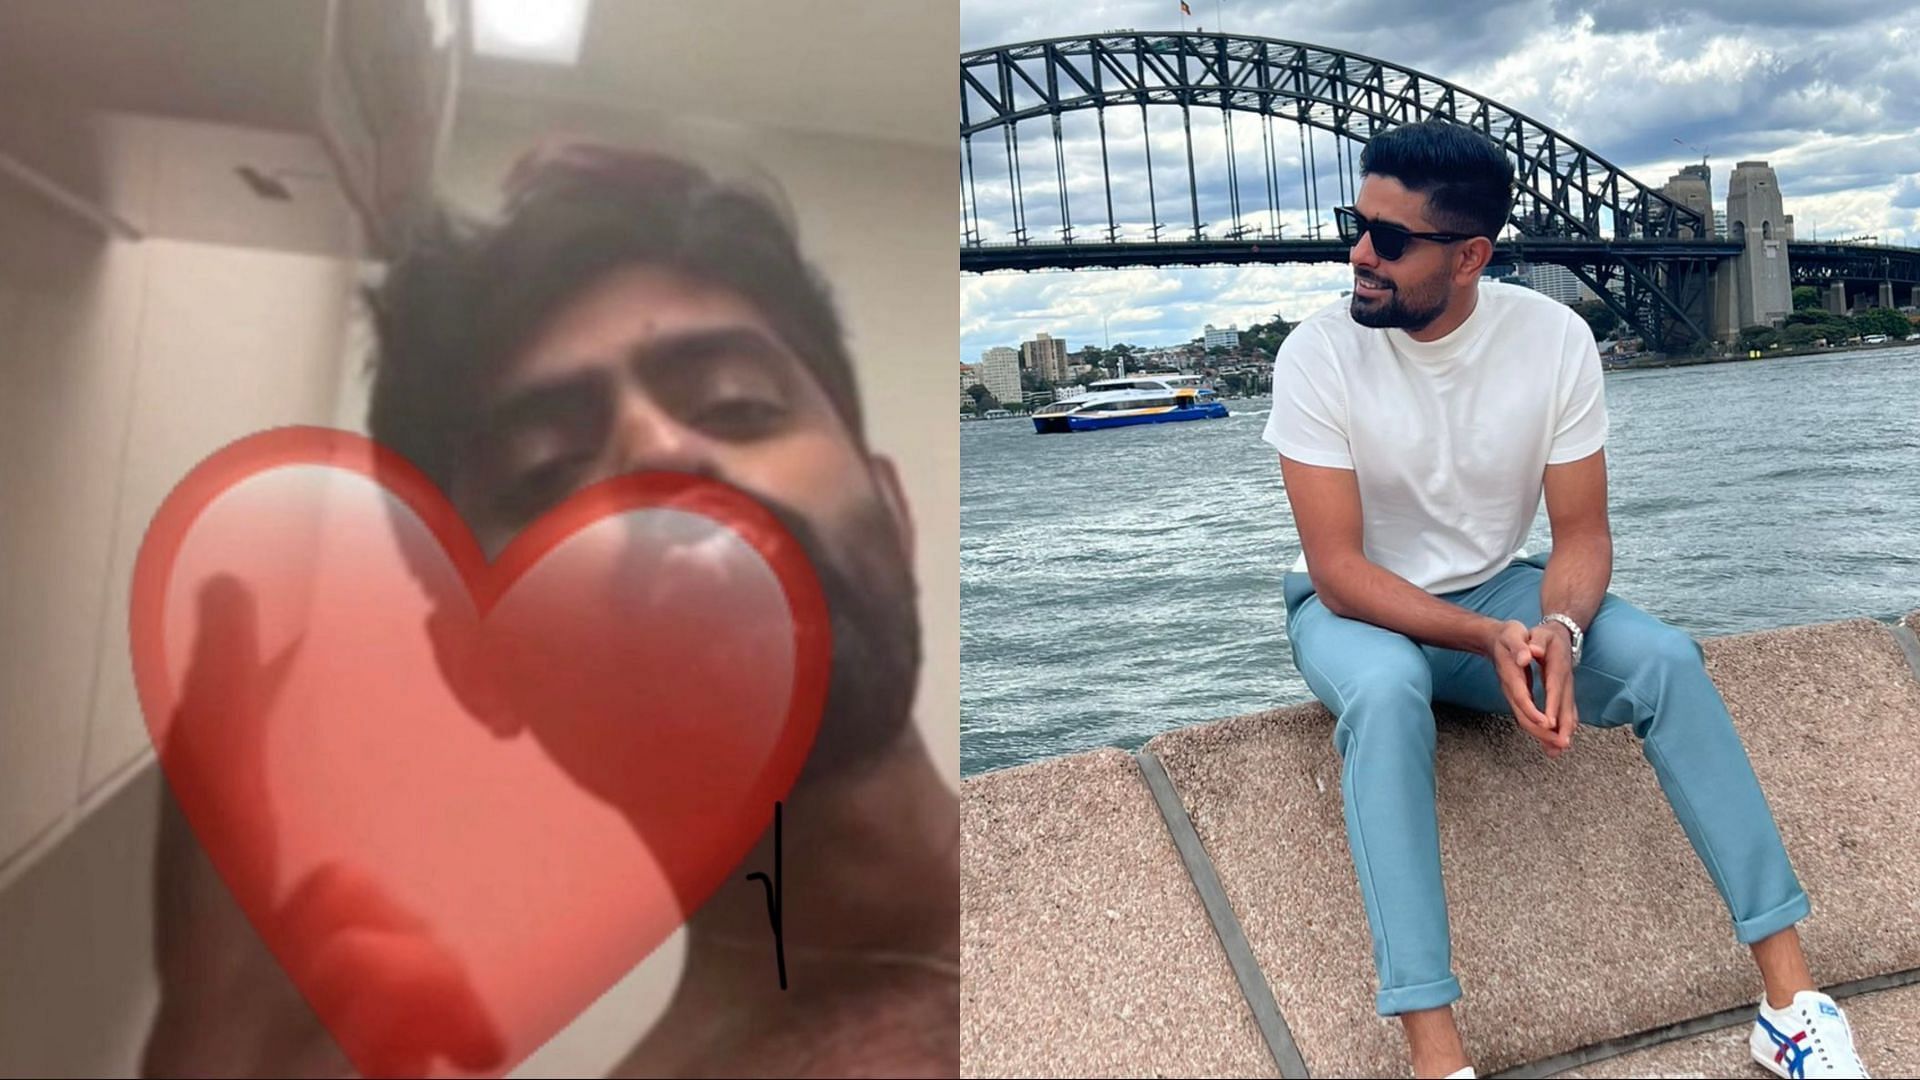 Babar Azam has been involved in an off-field controversy (Image: Twitter)